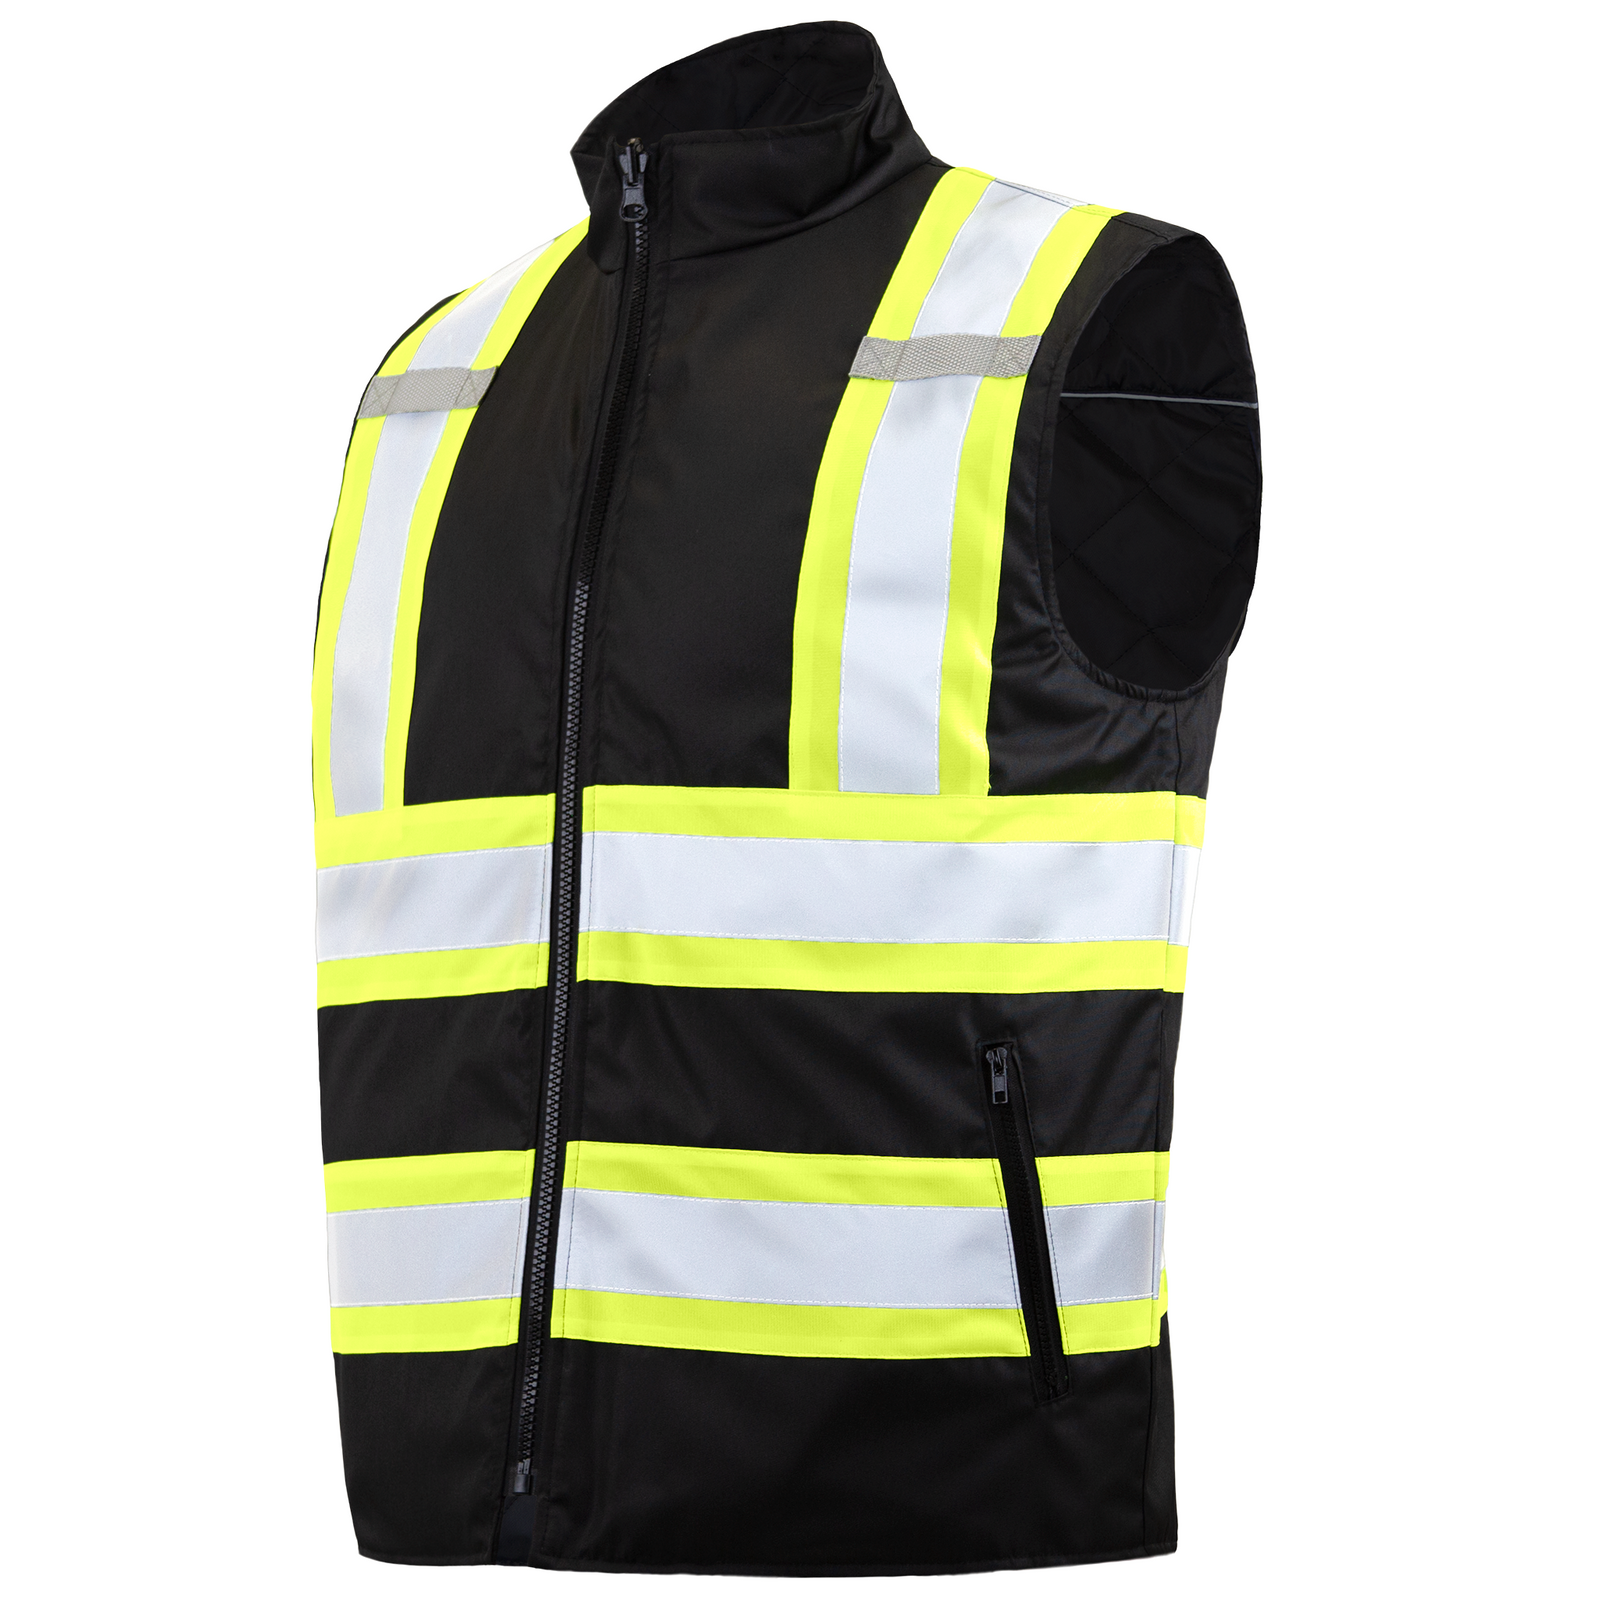 ANSI Insulated High Visibility Safety Vest | Reversible 2-in-1 ...